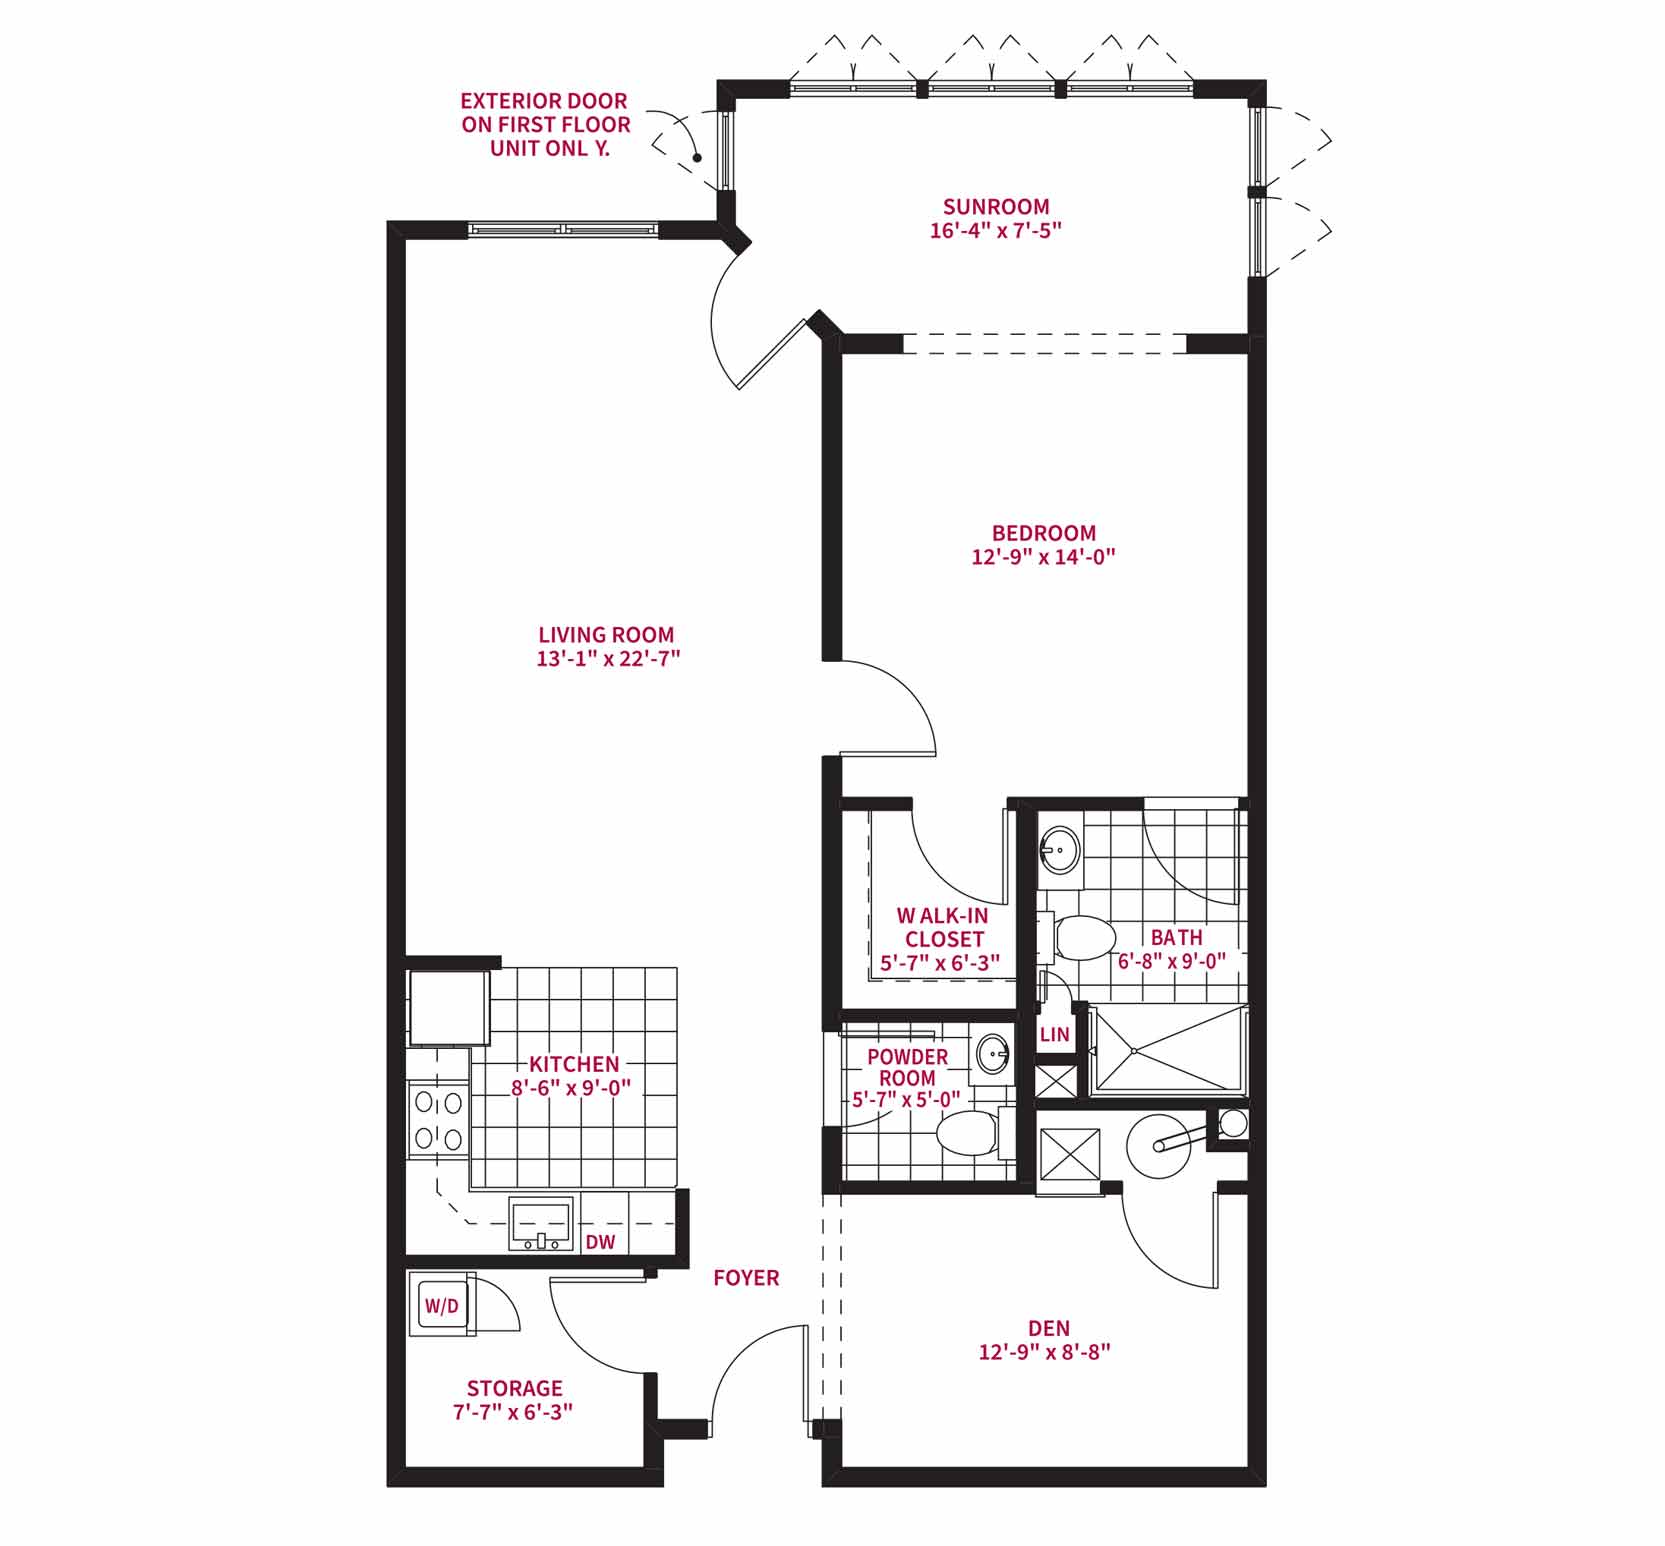 The Providence floor plan - Senior Apartments and Cottages at Jenner’s Pond West Grove PA